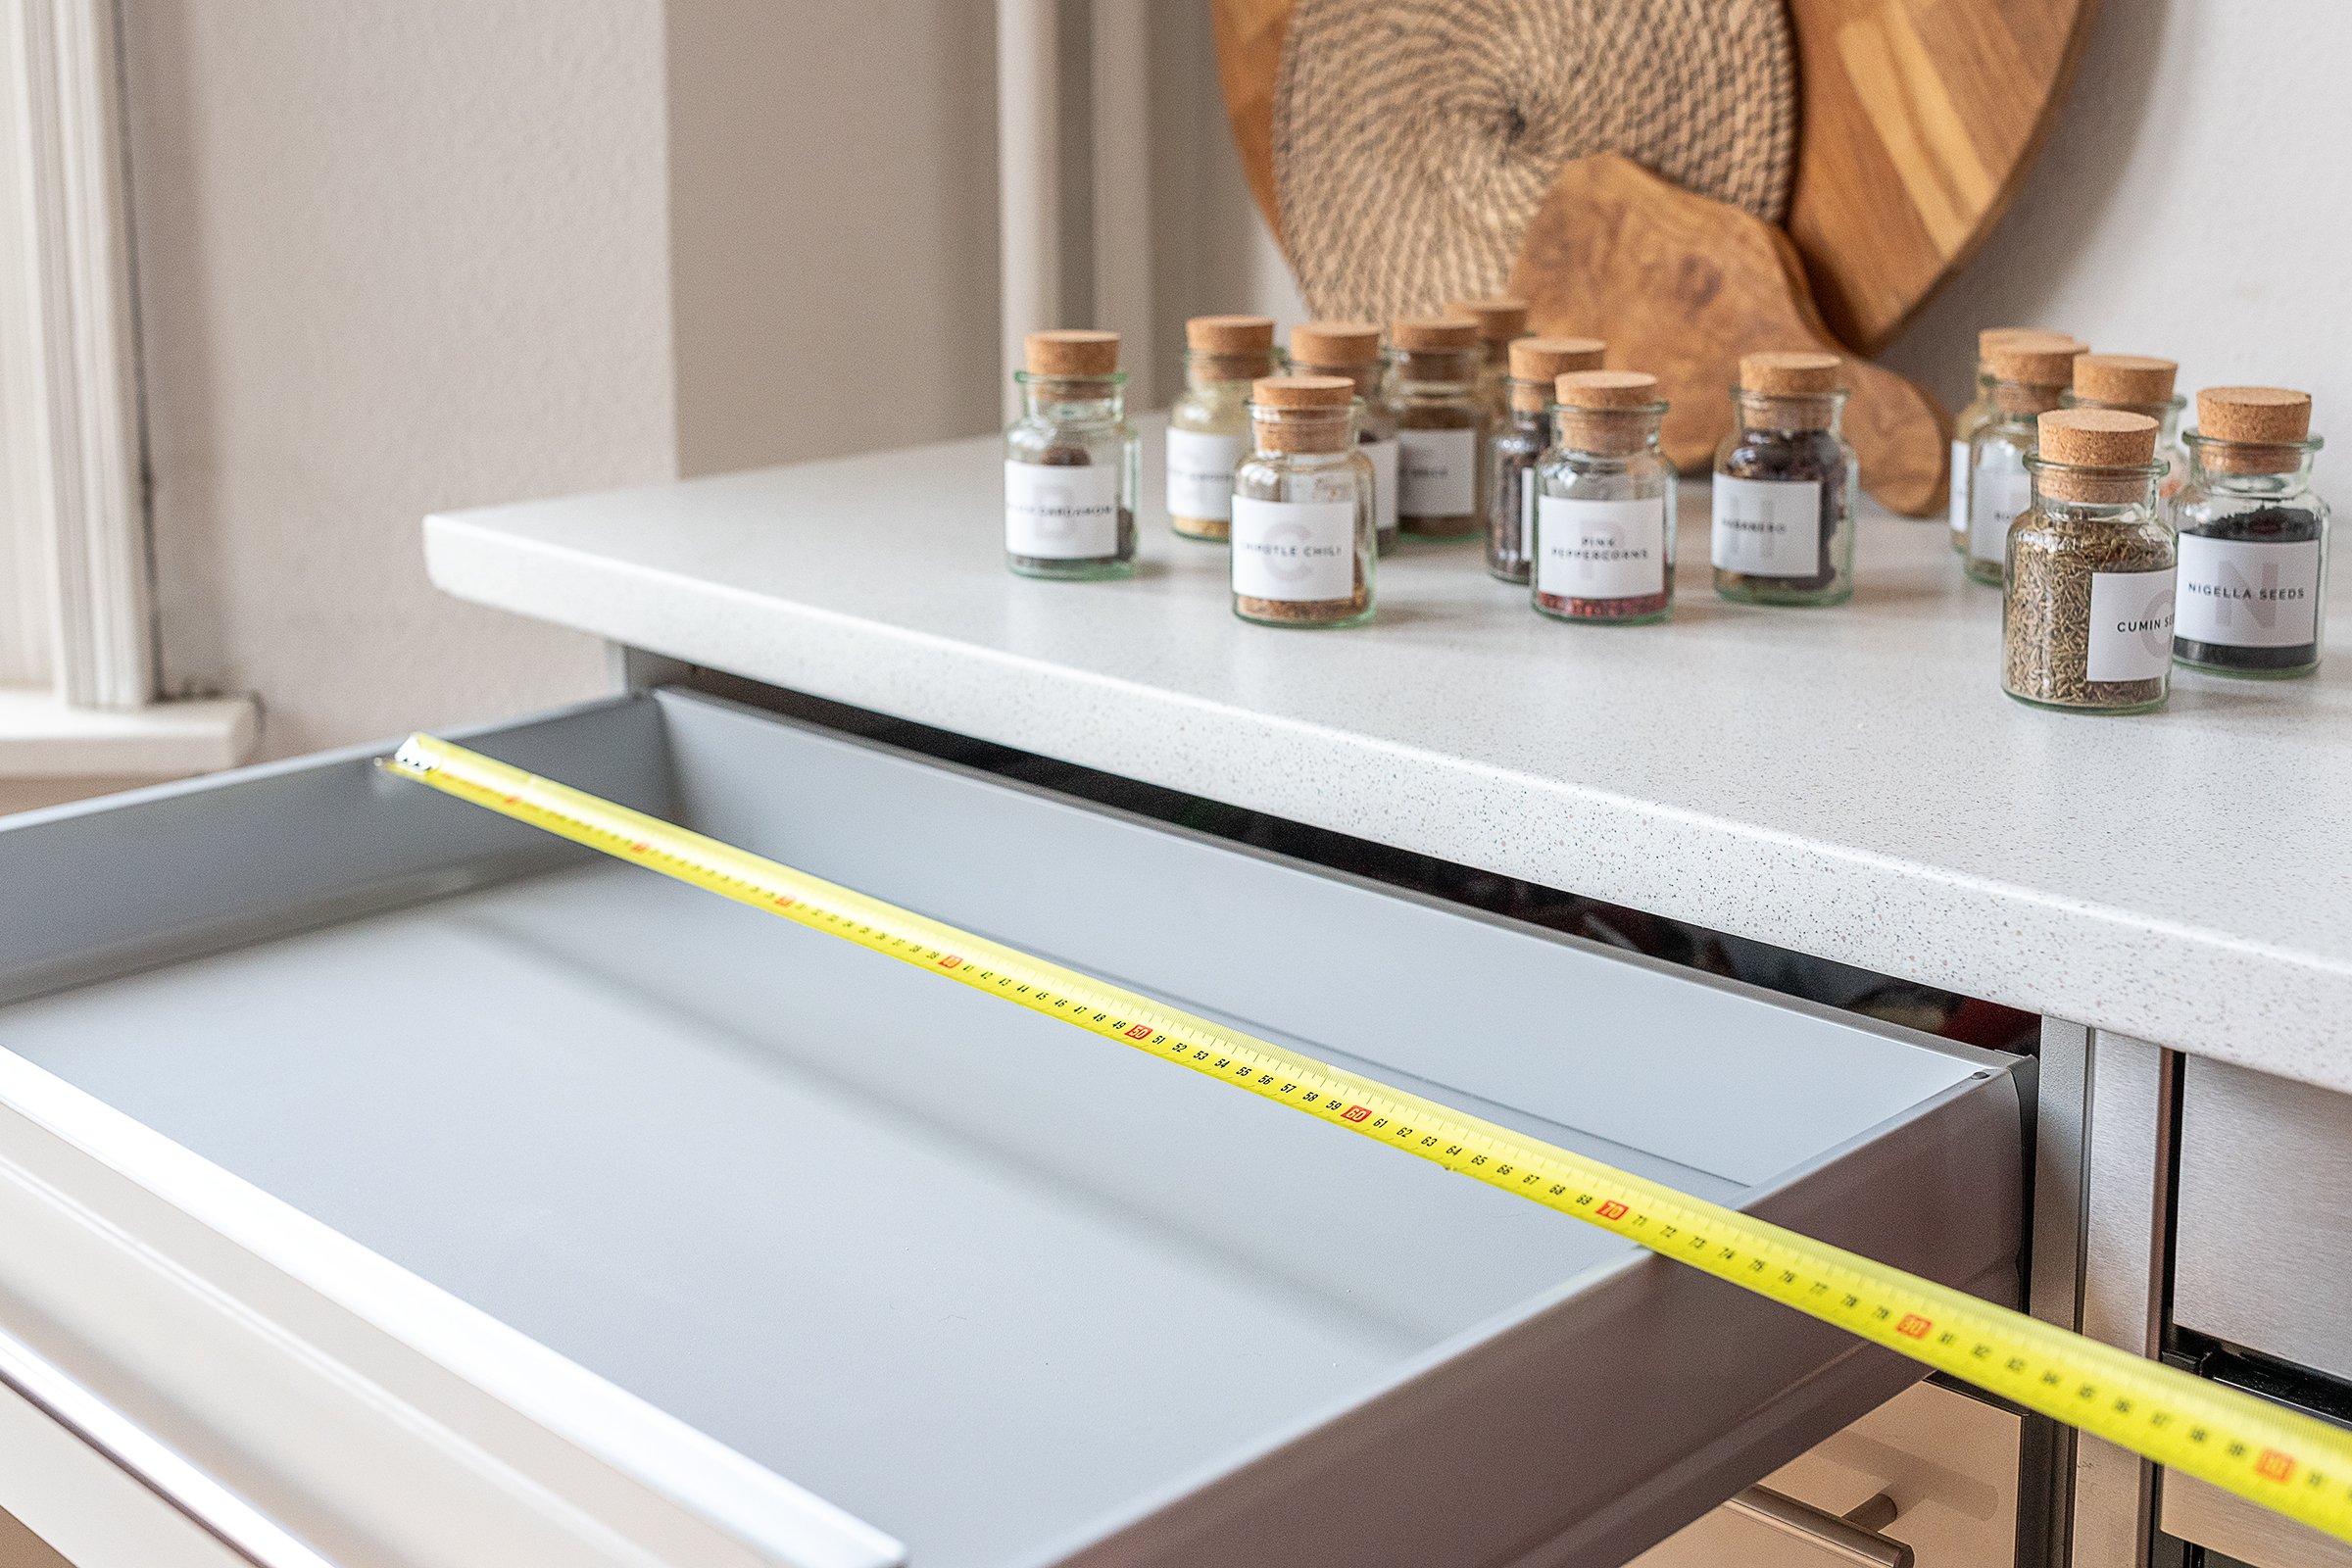 building a spice rack for a drawer - measuring the size